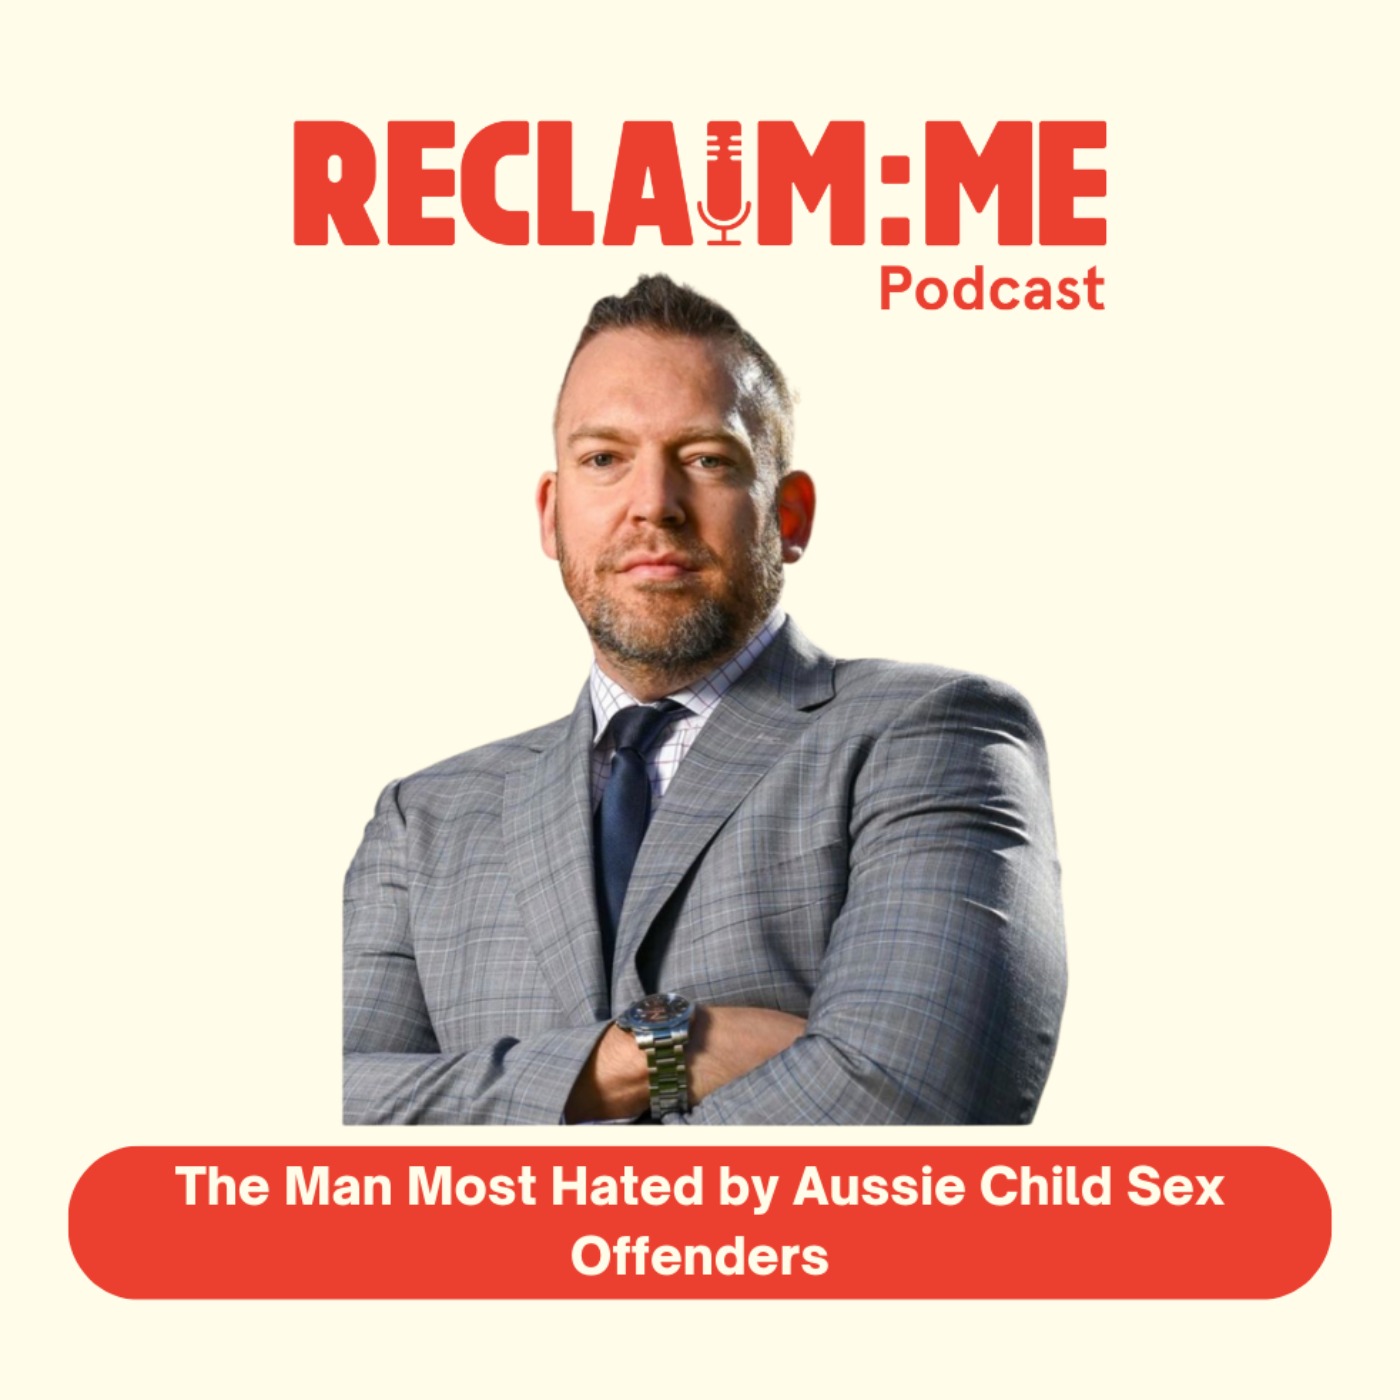 Episode 107 - The Man Most Hated by Aussie Child Sex Offenders - With Andrew Carpenter - Part 2